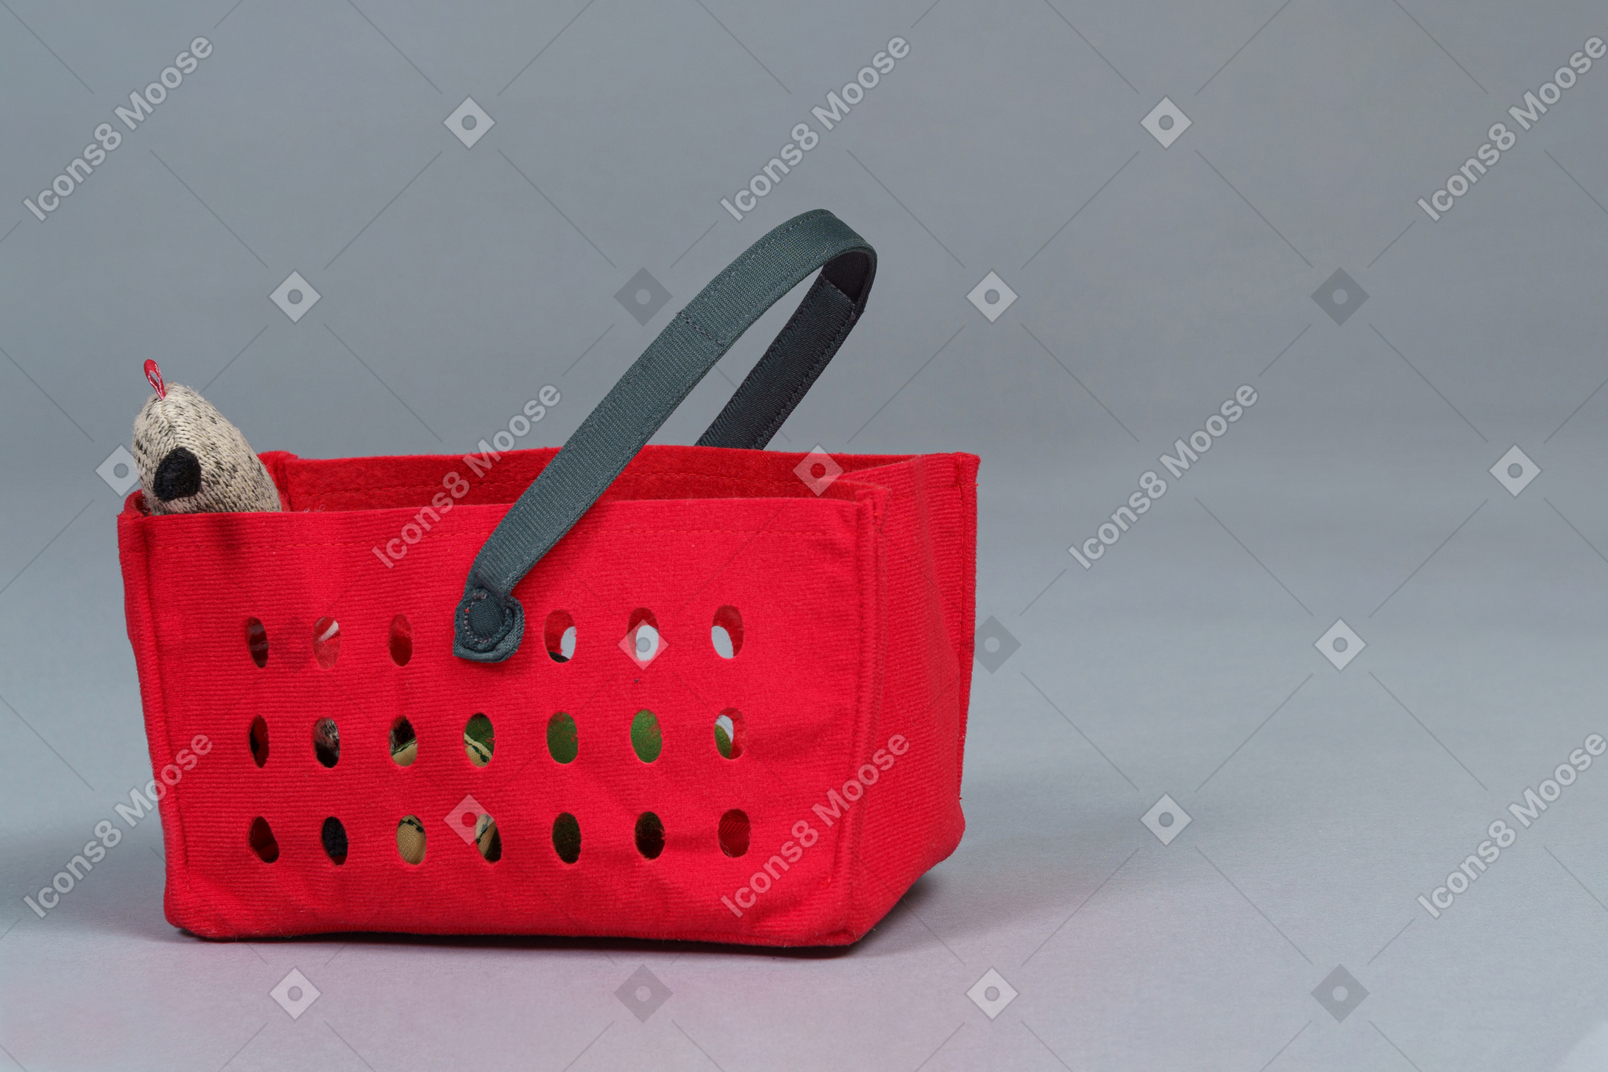 A red cart isolated on a gray background